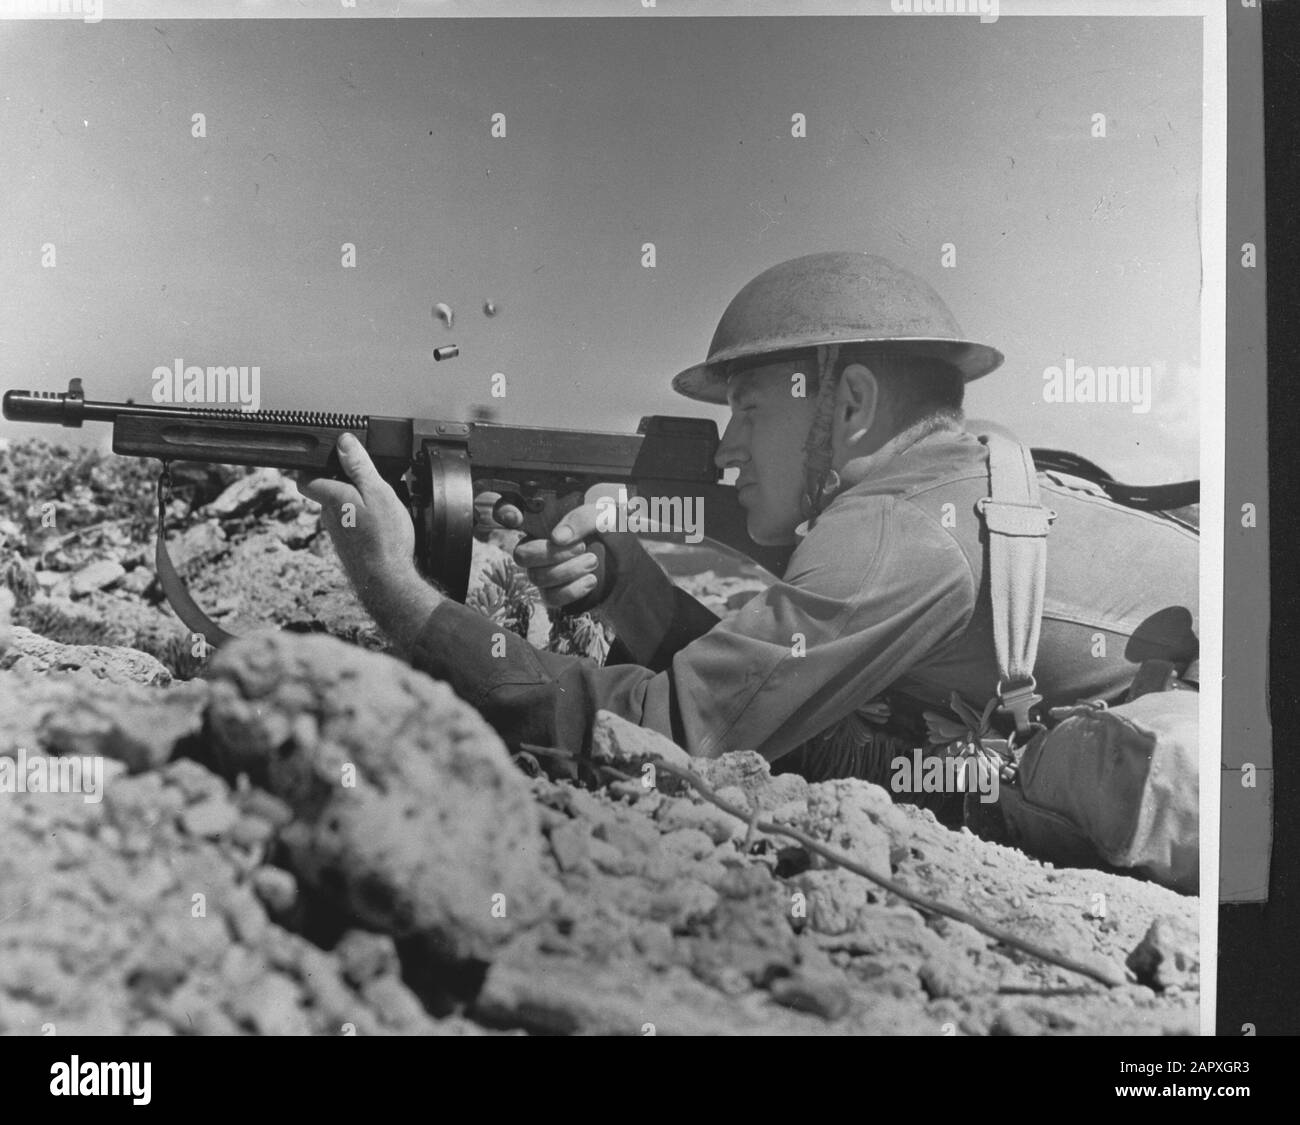 Wi [West Indies]/Anefo London series  Soldier of the Royal Netherlands Army with modern Tommy-gun on Curaçao's rocky coast [soldier of the Dutch army with a modern Tommy-gun on the rocky coast of Curaçao] Annotation: Repronegative. Date: {1940-1945} Location: Curaçao Keywords: army, machine guns, soldiers, World War II Stock Photo